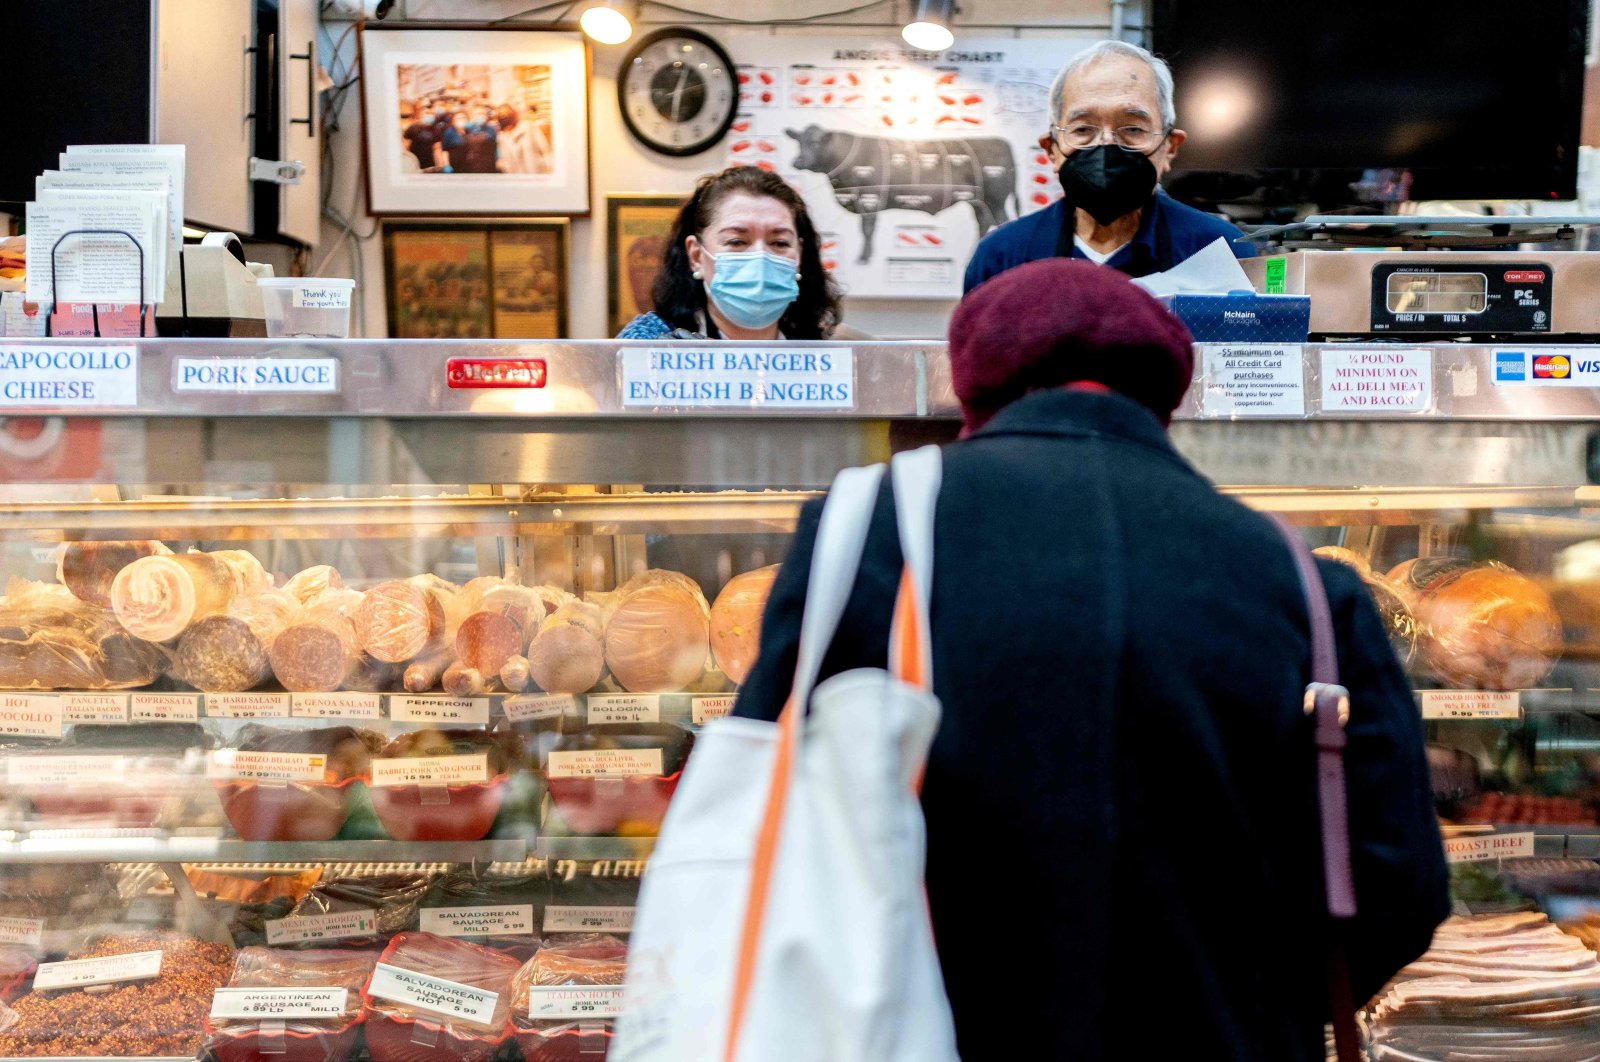 Employees assist a customer at Canales Quality Meats in Eastern Market in Washington, D.C., U.S., Feb. 8, 2022. (AFP Photo)